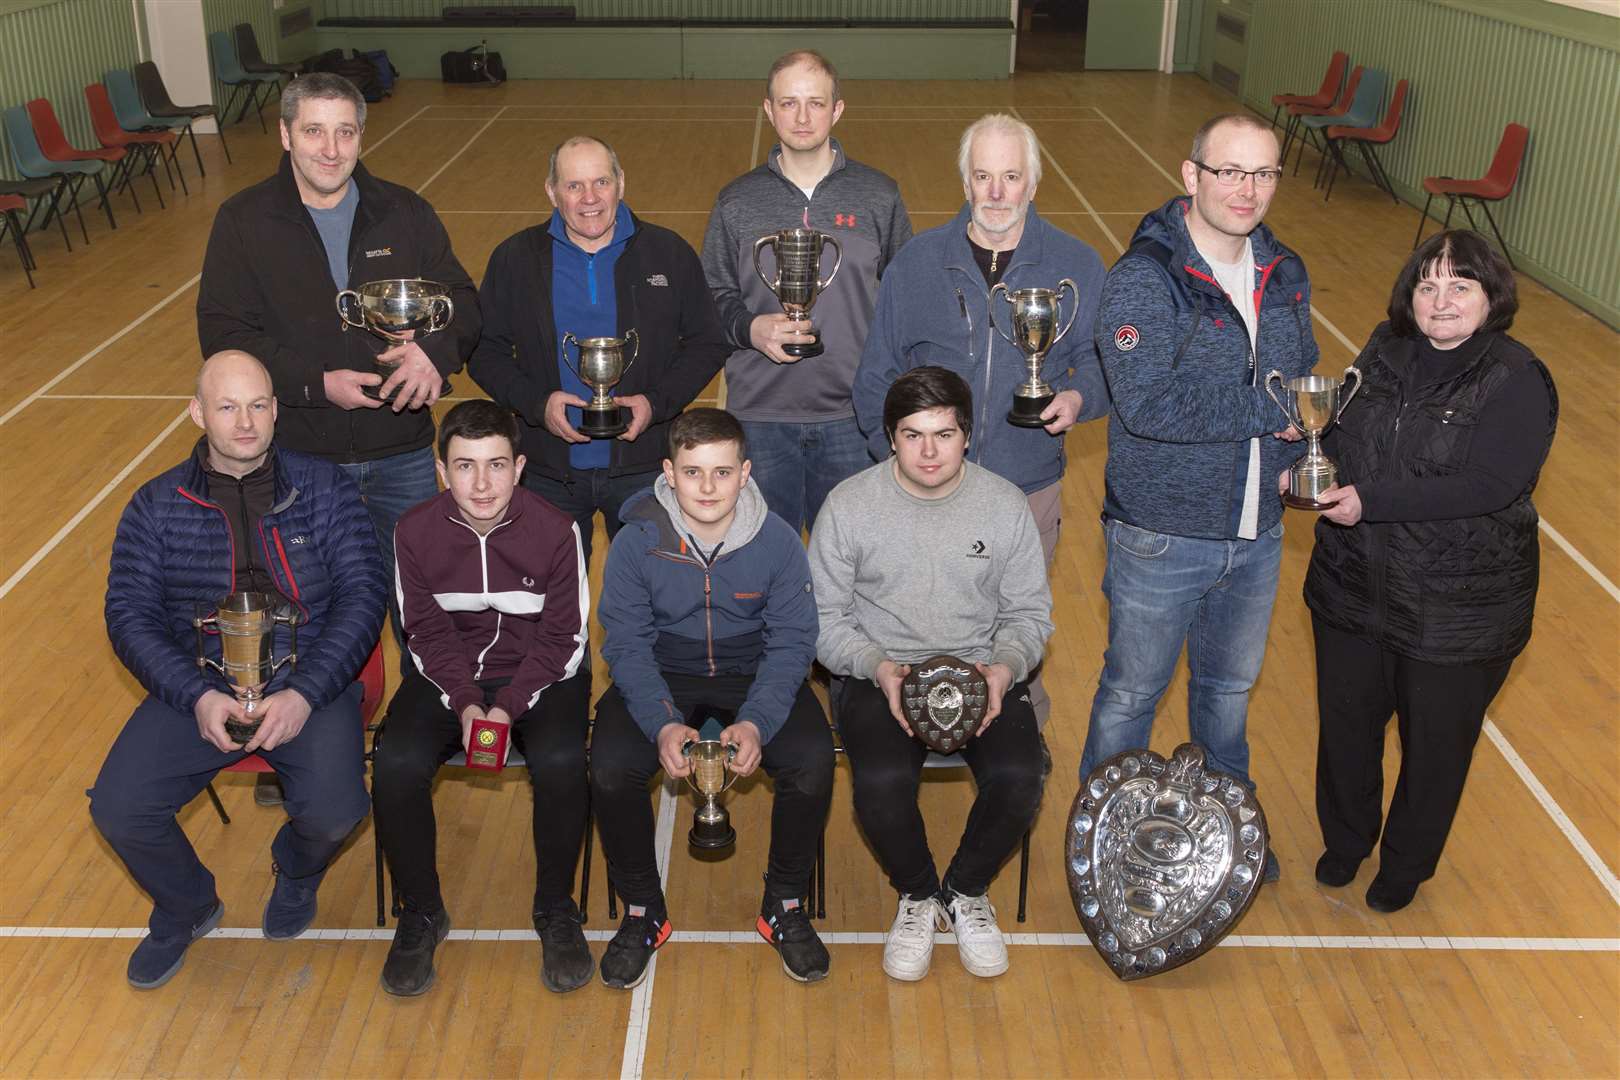 With the Caithness Small Bore Rifle Association indoor season drawing to a close, league and team trophies were presented in Watten hall following the St Clair Cup competition. Association secretary Marty Simpson is pictured presenting the county championship trophy to David Simpson of Wick Old Stagers. Looking on are some of the other shooters who accepted trophies on behalf of their clubs and teams. They are (from left, back) Don Mowat, Pentland, Graham Robertson, Stirkoke, John Harrold, Keiss, Brian Young, Wick Old Stagers; (front) John Campbell, Ross Sutherland, Robbie Levack, all Halkirk, and Ally Baikie, Westfield. Picture: Robert MacDonald / Northern Studios